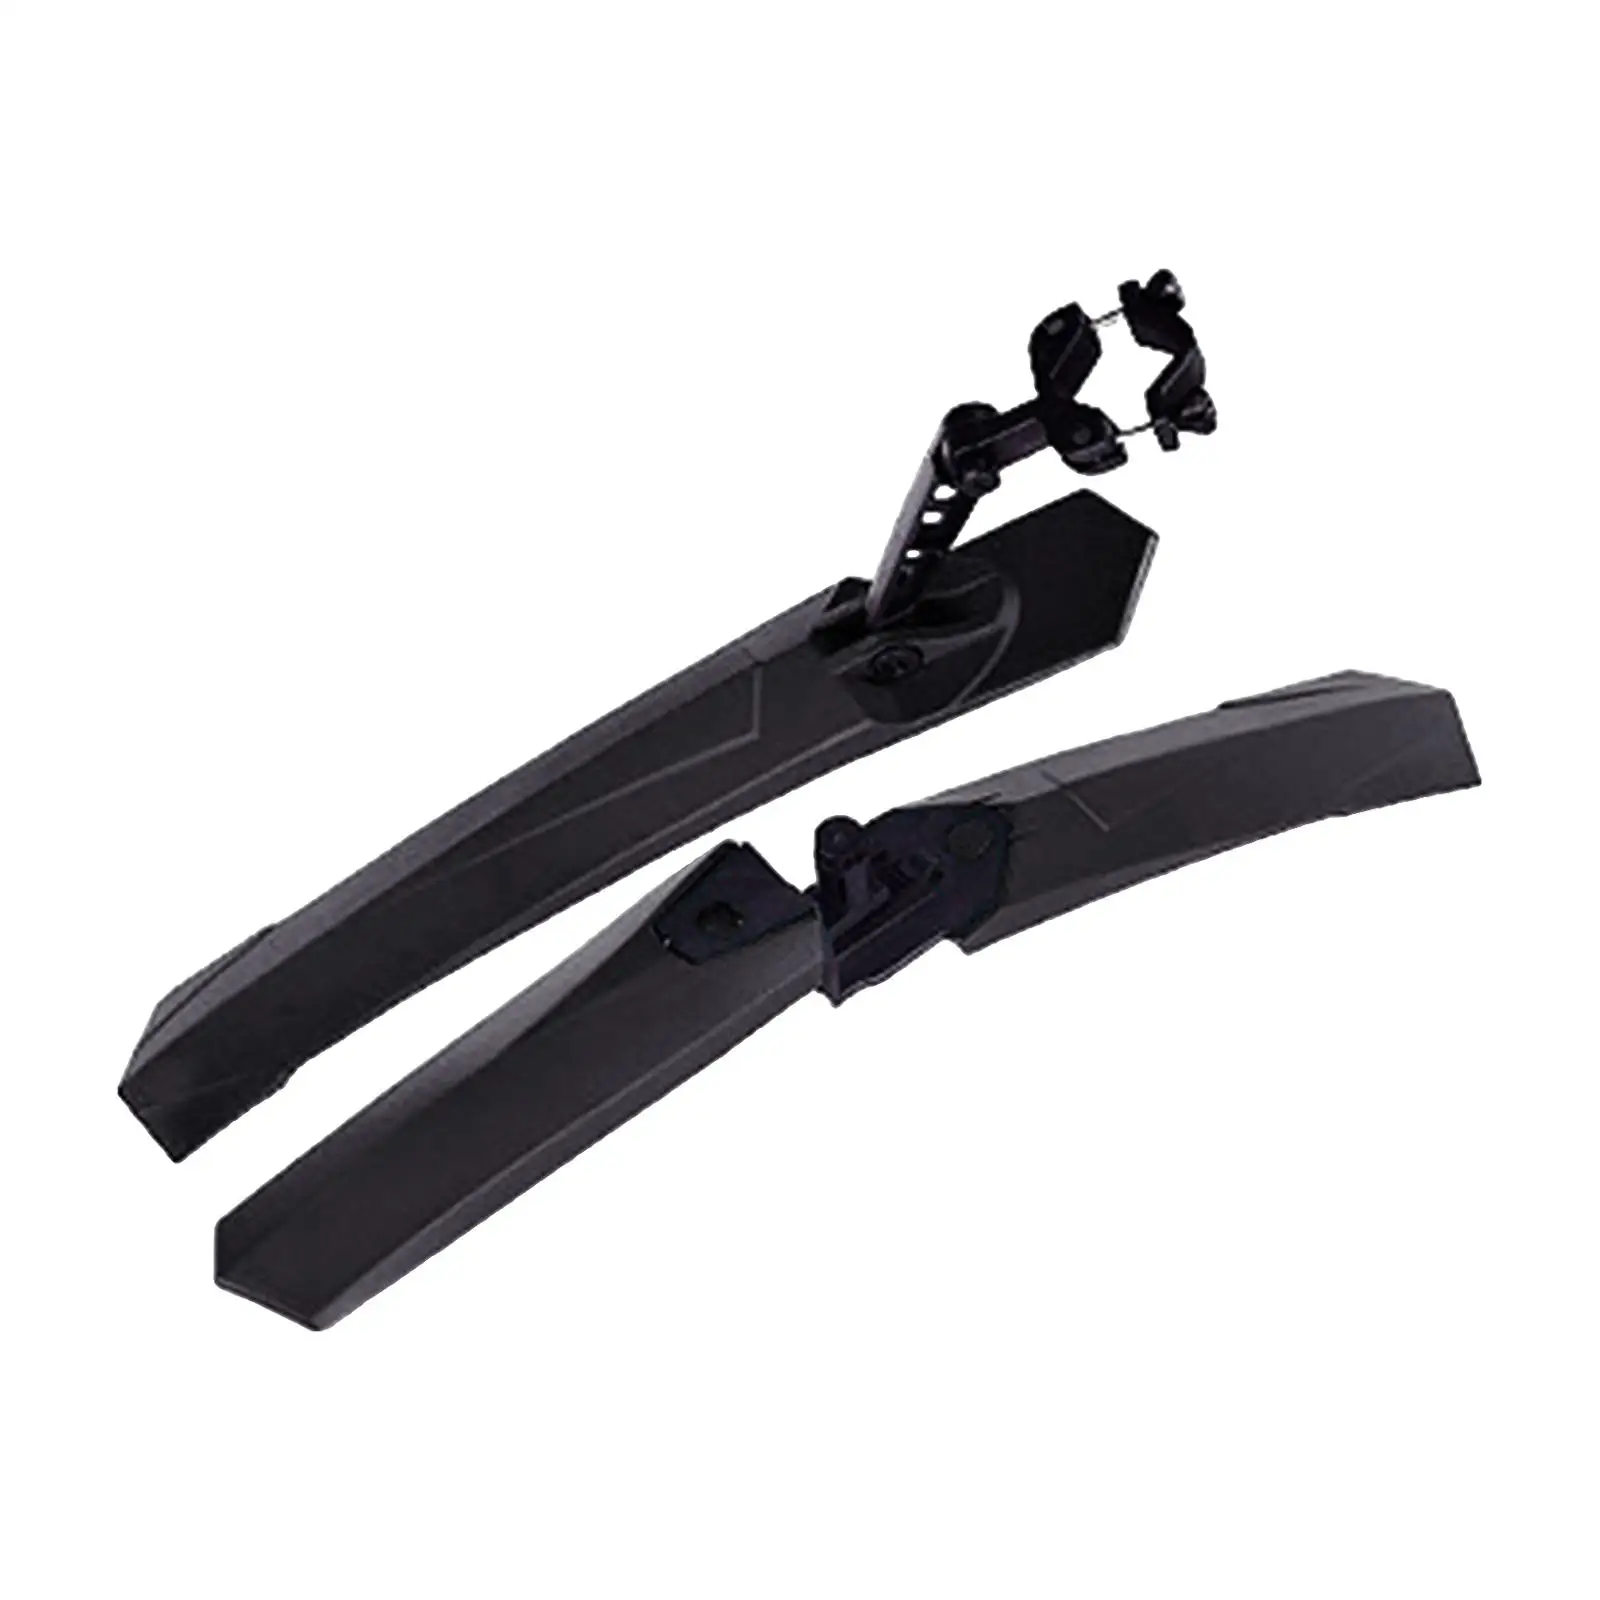 Bike Mudguard Front and Rear Set Bicycle Fenders Bike Fender Mudflap for Riding Road Bike Folding Bike Spare Parts Accessories